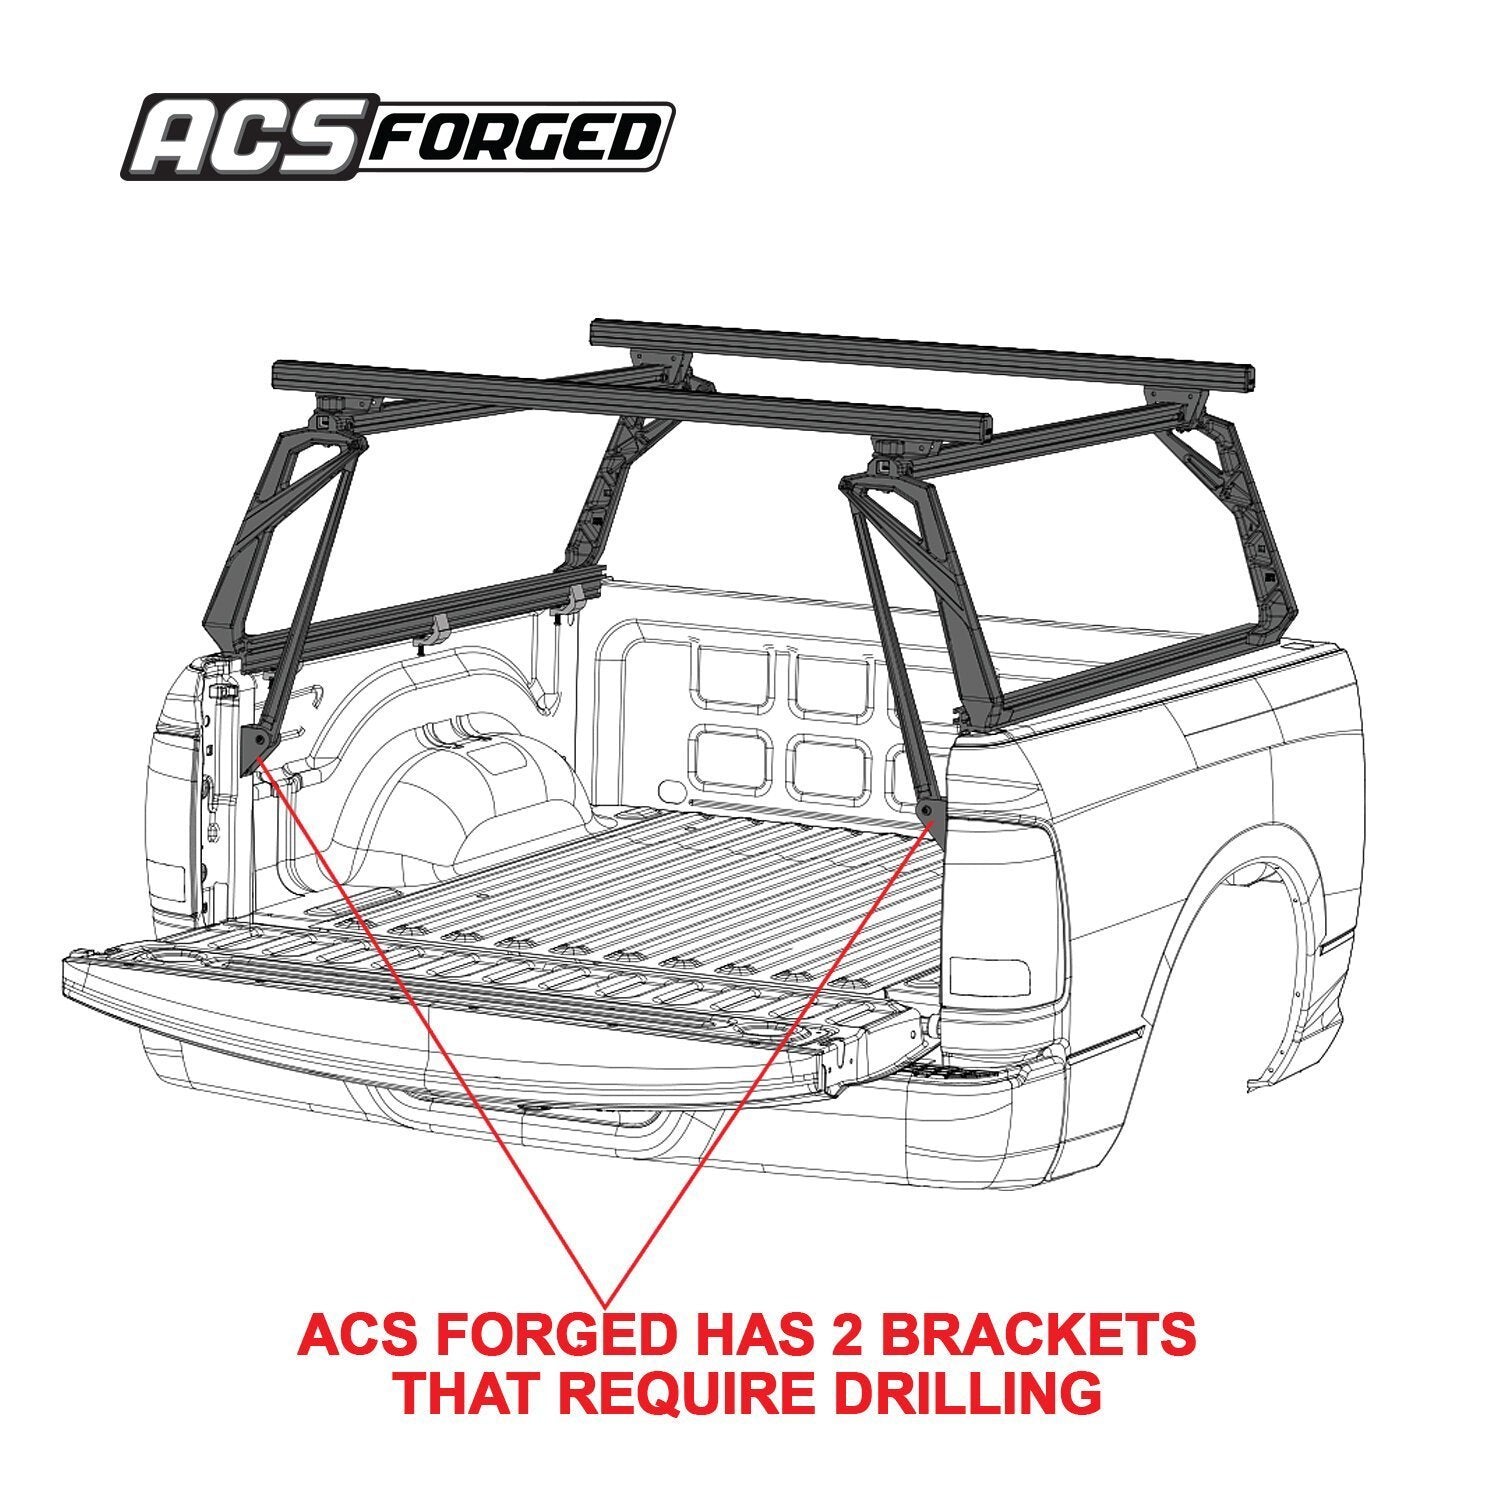 '19-22 Ford Ranger-ACS Forged Bed Accessories Leitner Designs design